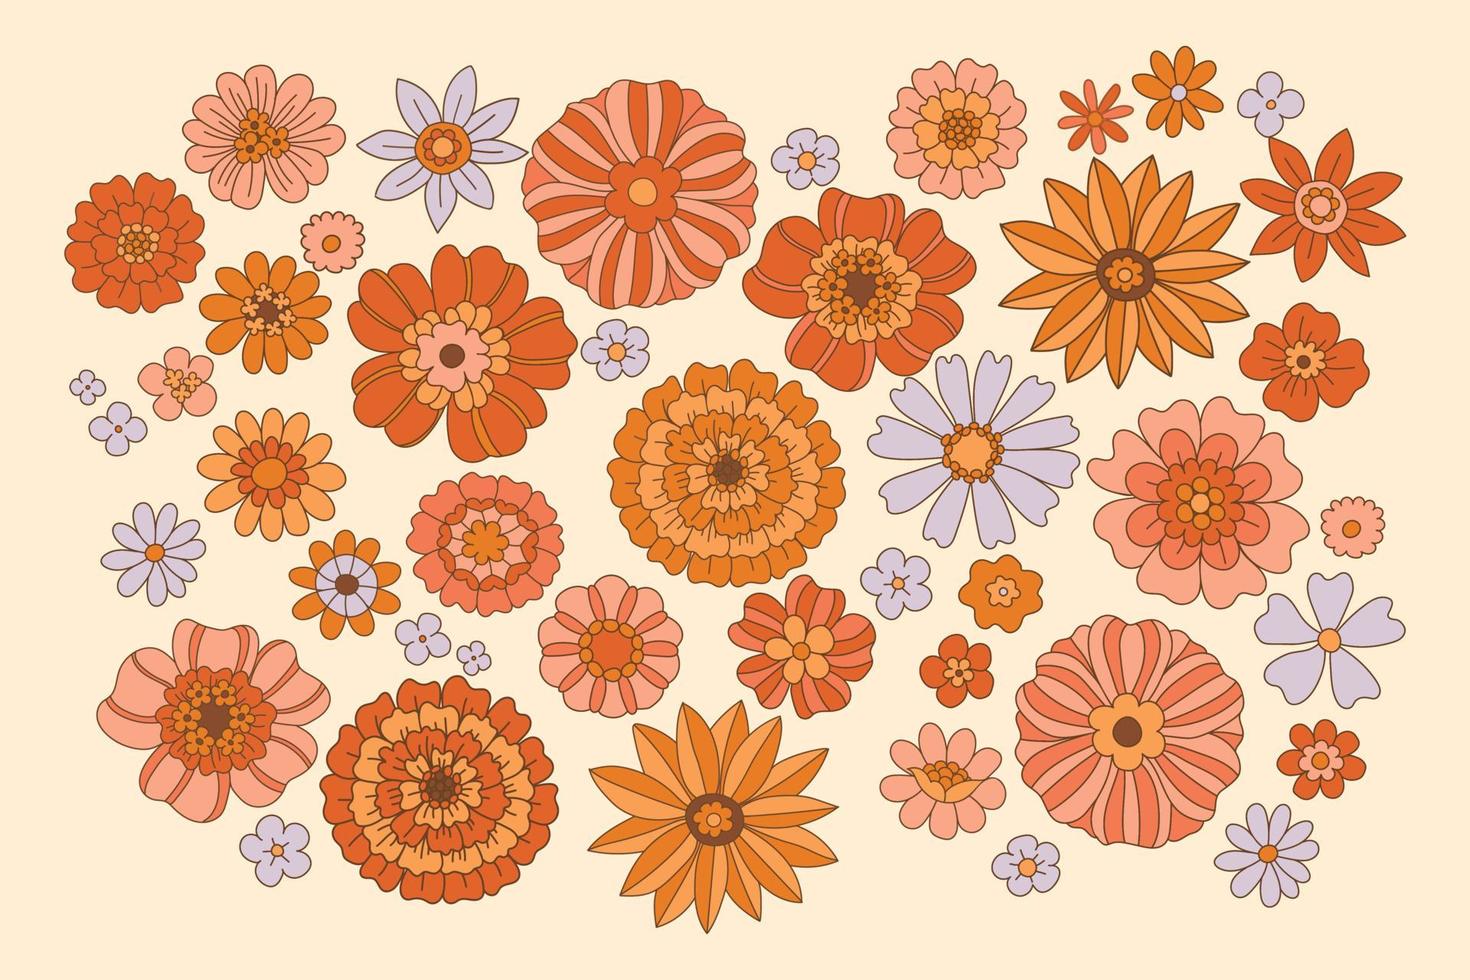 70s flowers. Hippie aesthetic vector illustration. Set of floral elements in the retro style of the 70's, 60's. Boho chic floral background. Flover power.Groovy design.